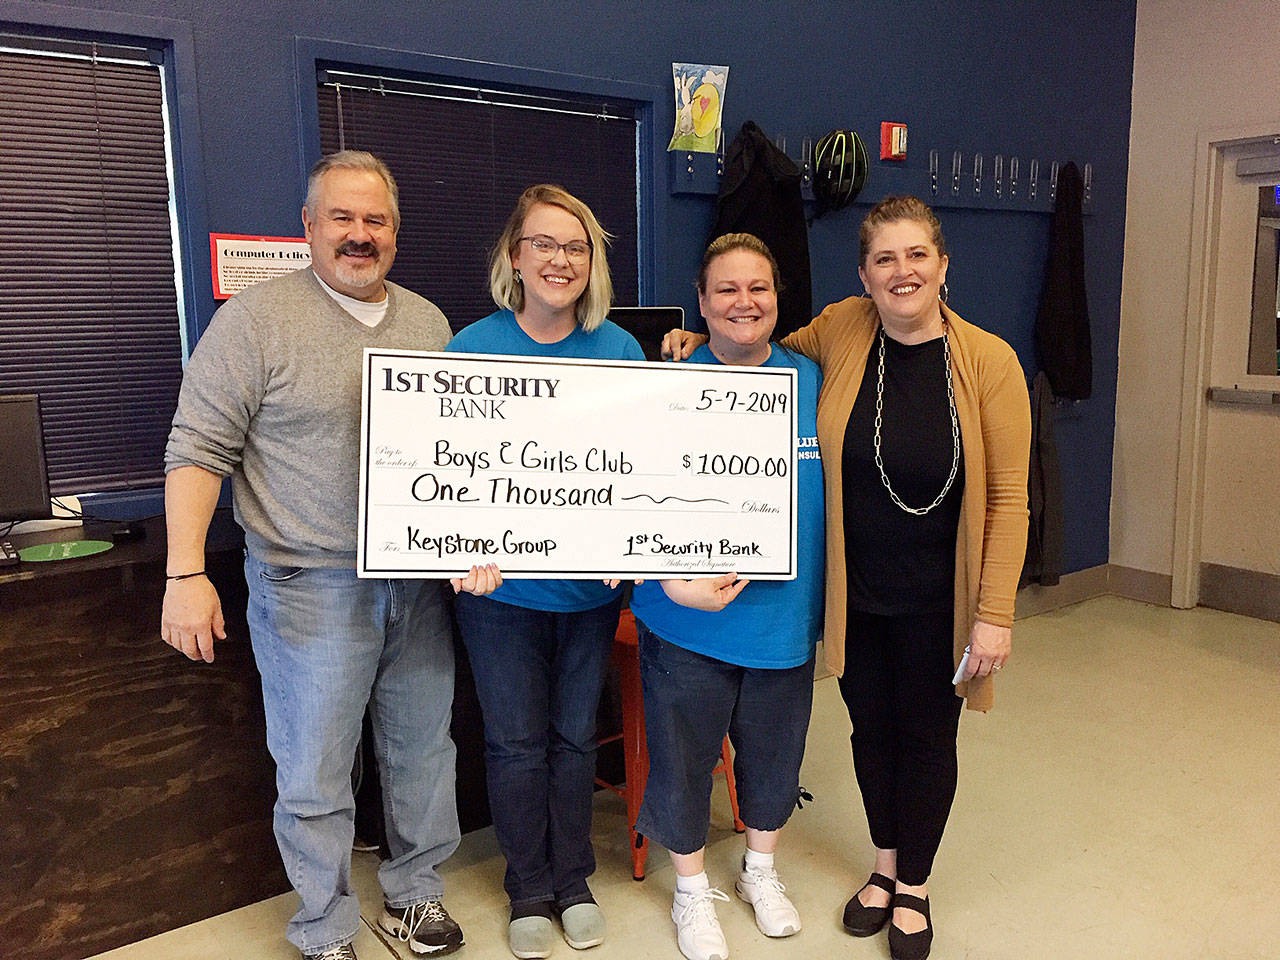 Pictured, from left, are: Dave Miller, Sequim Boys & Girls Club Unit Director; Kylie Douglas, Boys & Girls Club Teen Club Coordinator; Tessa Jackson, Boys & Girls Club Program Director, and Ann Jagger, 1st Security Bank Branch Manager. Submitted photo